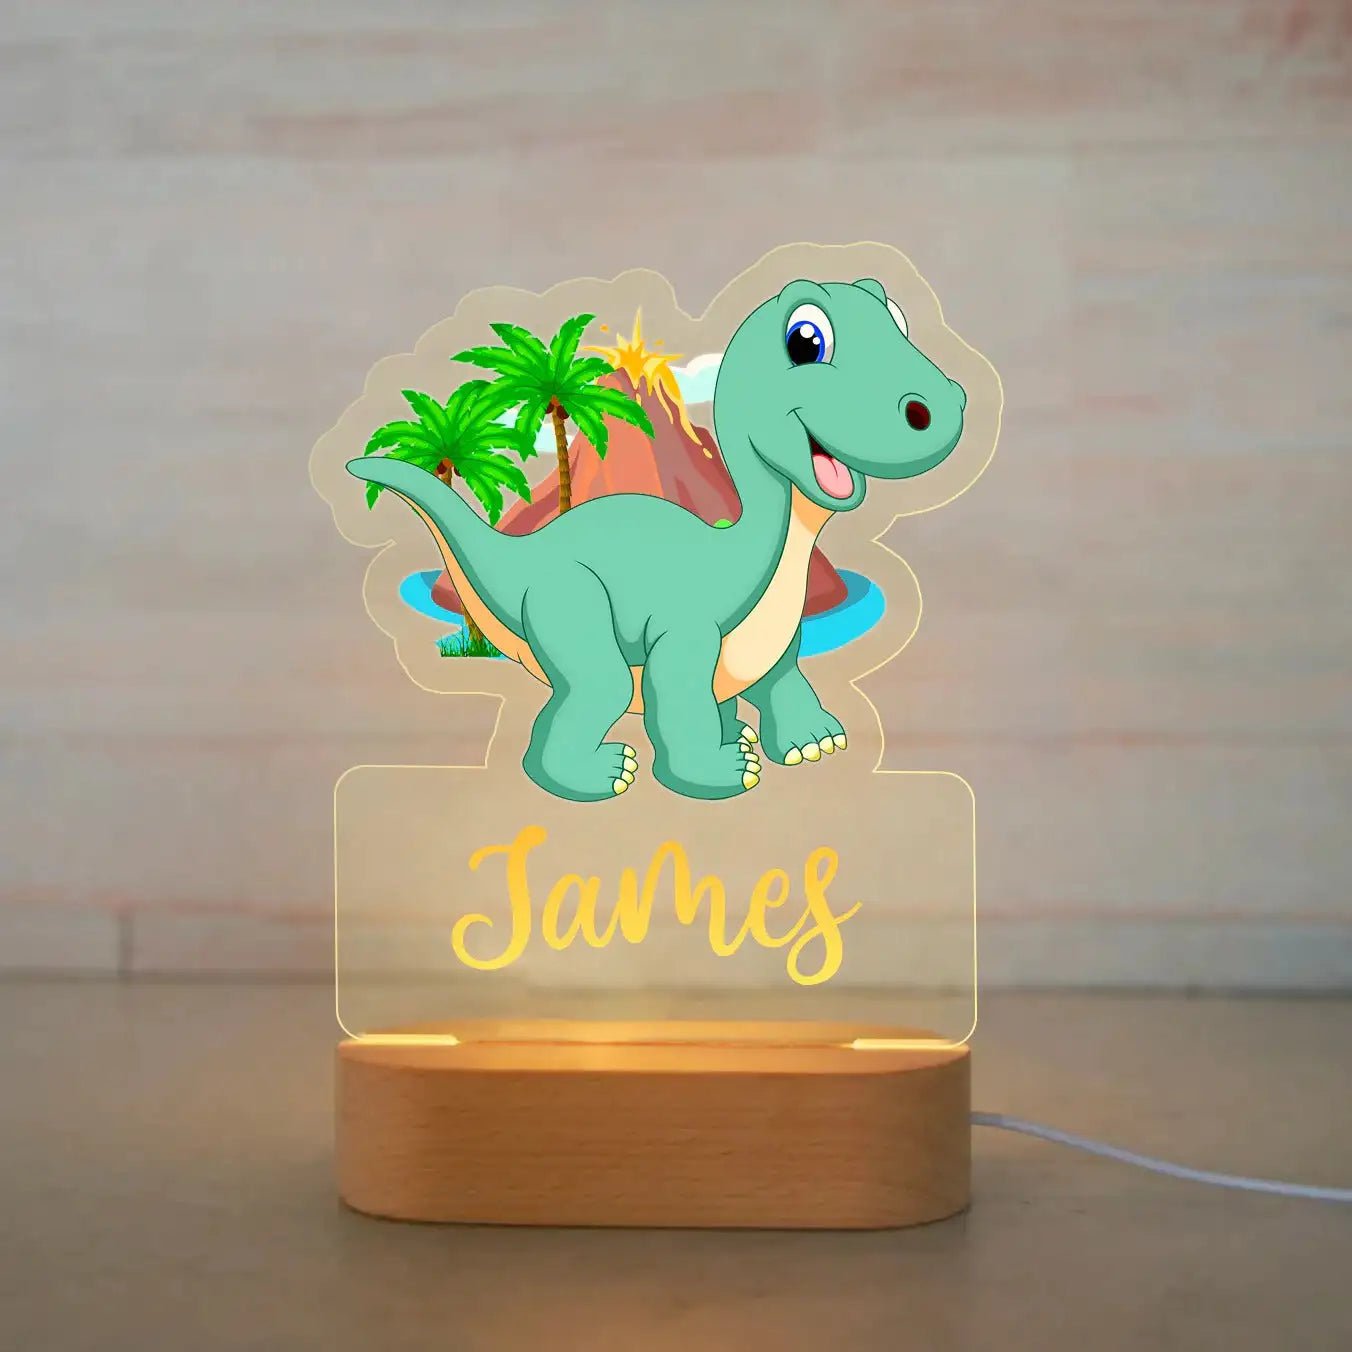 Customized Animal-themed Night Light for Kids - Personalized with Child's Name, Acrylic Lamp for Bedroom Decor Warm Light / 06Dinosaur